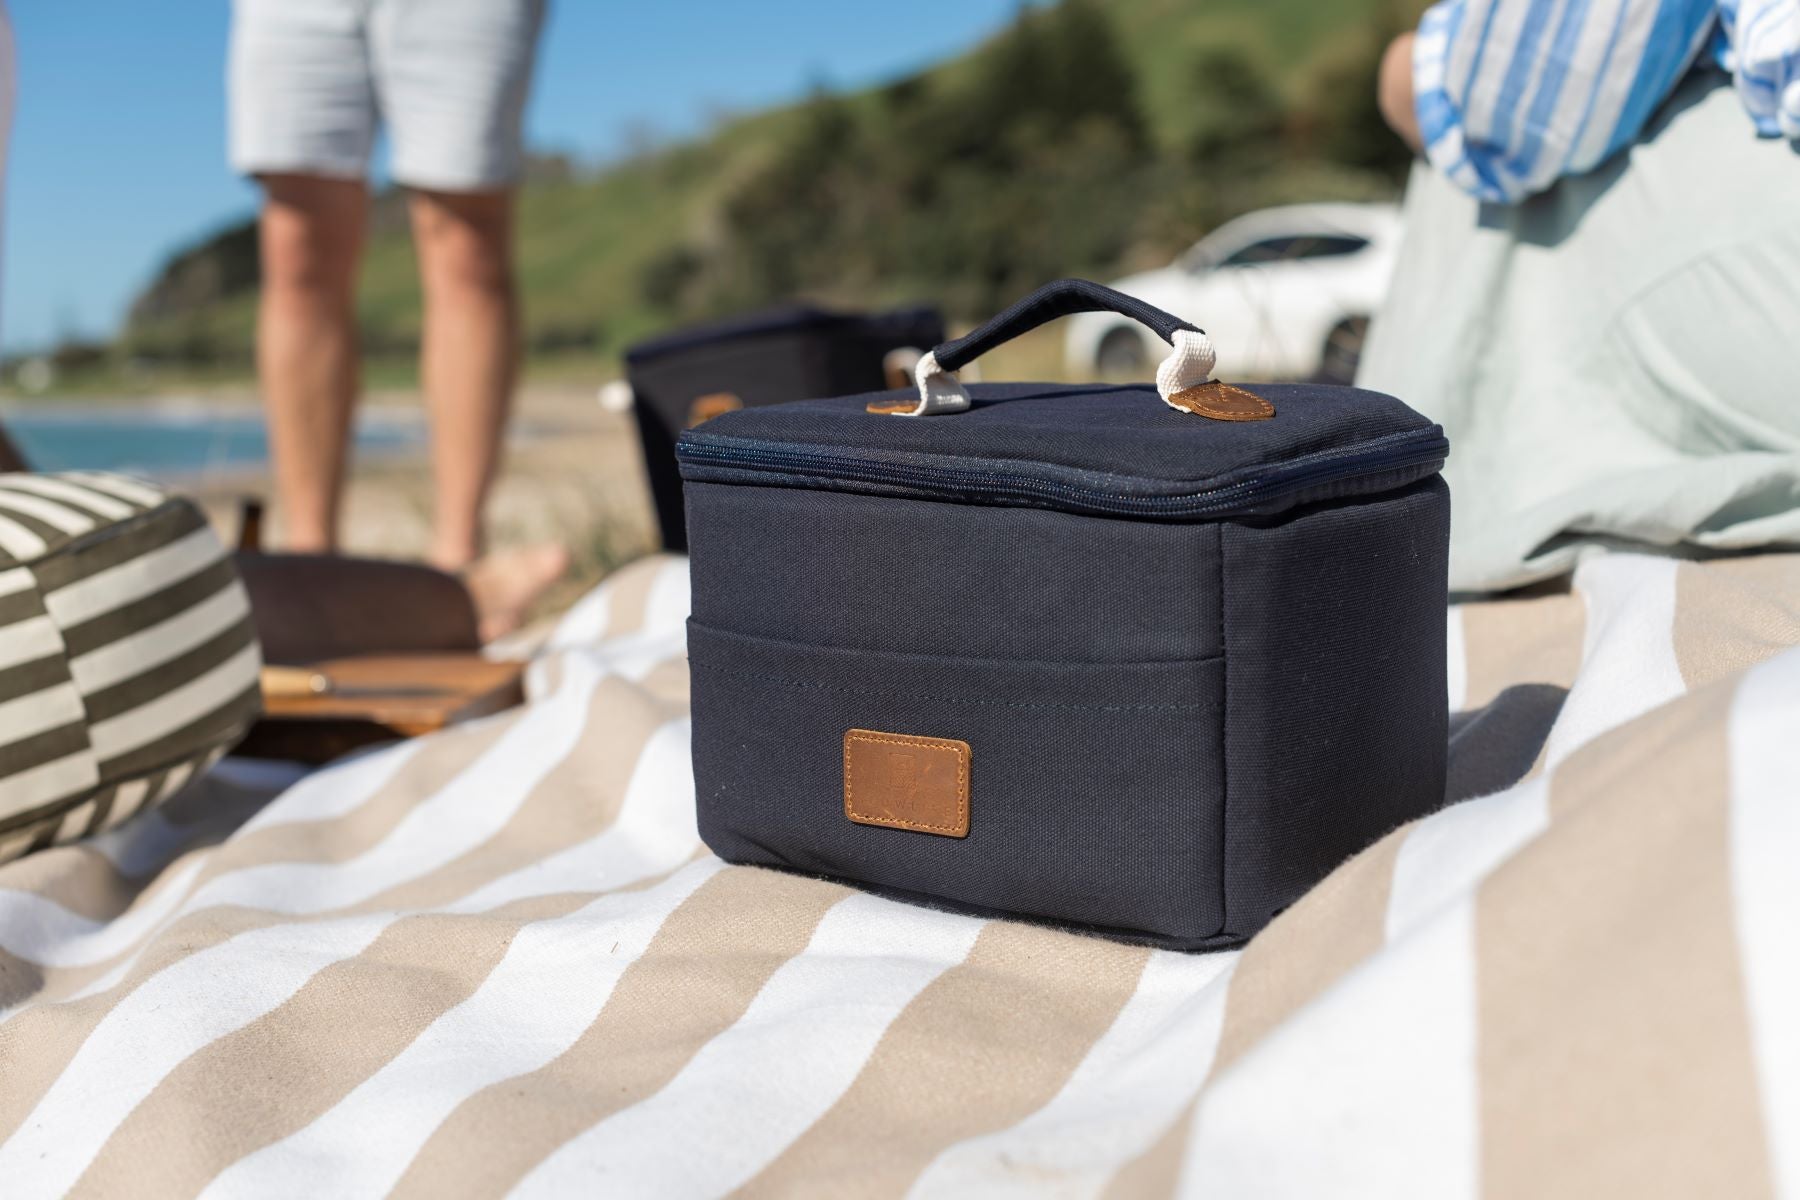 The Navy Slowlife Collection Lunch Bag sitting on the Slowlife Collection Picnic Rug at the beach.